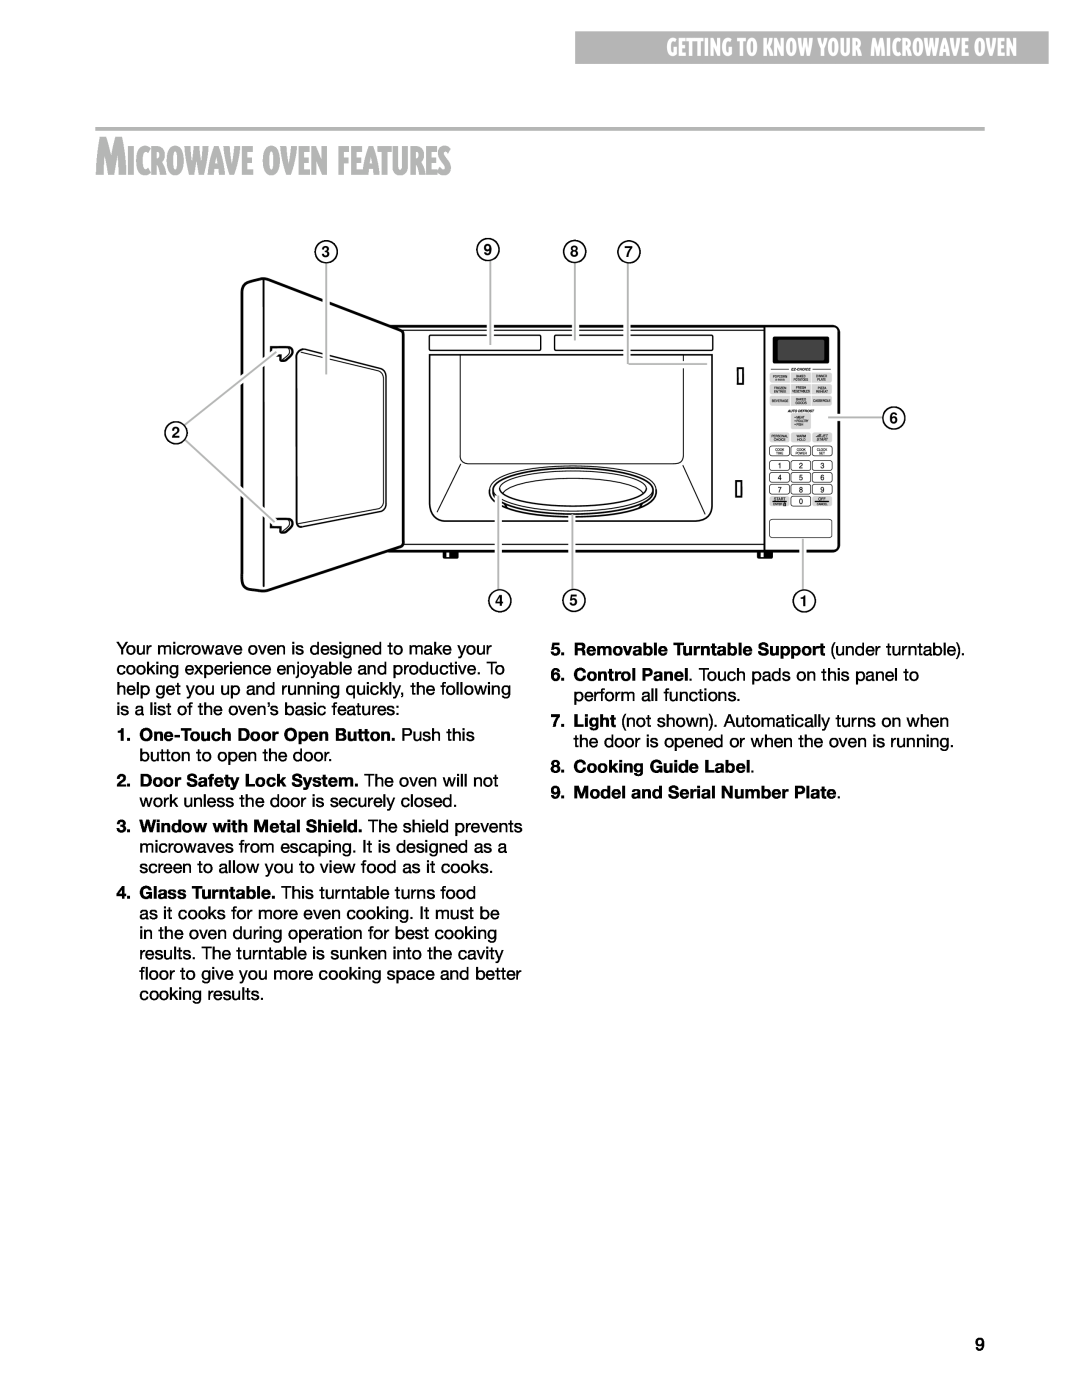 Whirlpool MT1111SK installation instructions Microwave Oven Features, Getting To Know Your Microwave Oven 